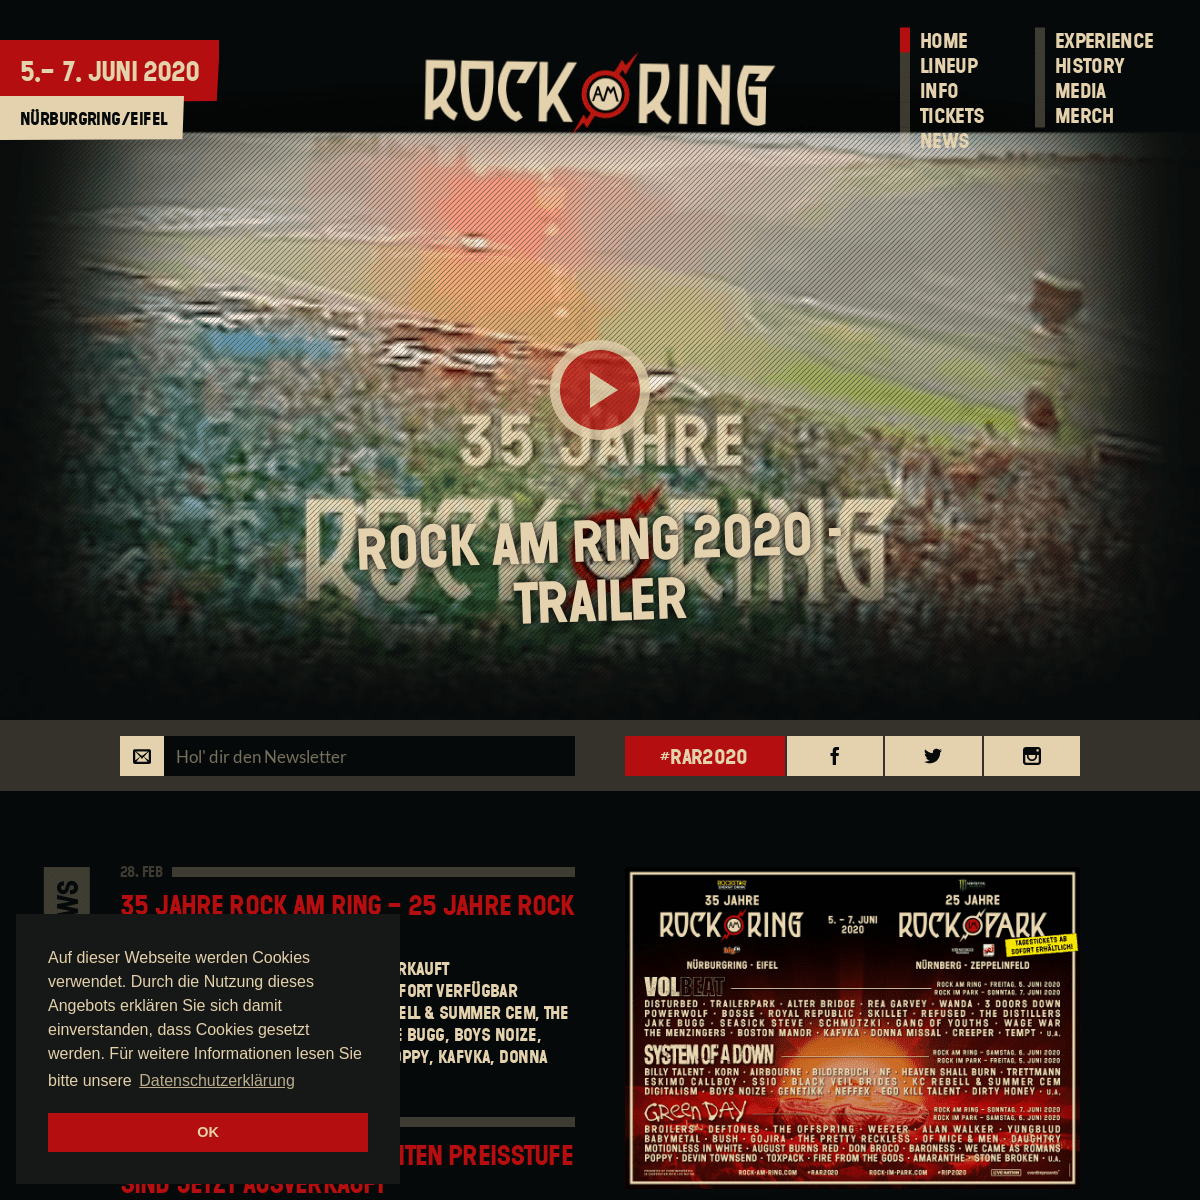 A complete backup of rock-am-ring.com